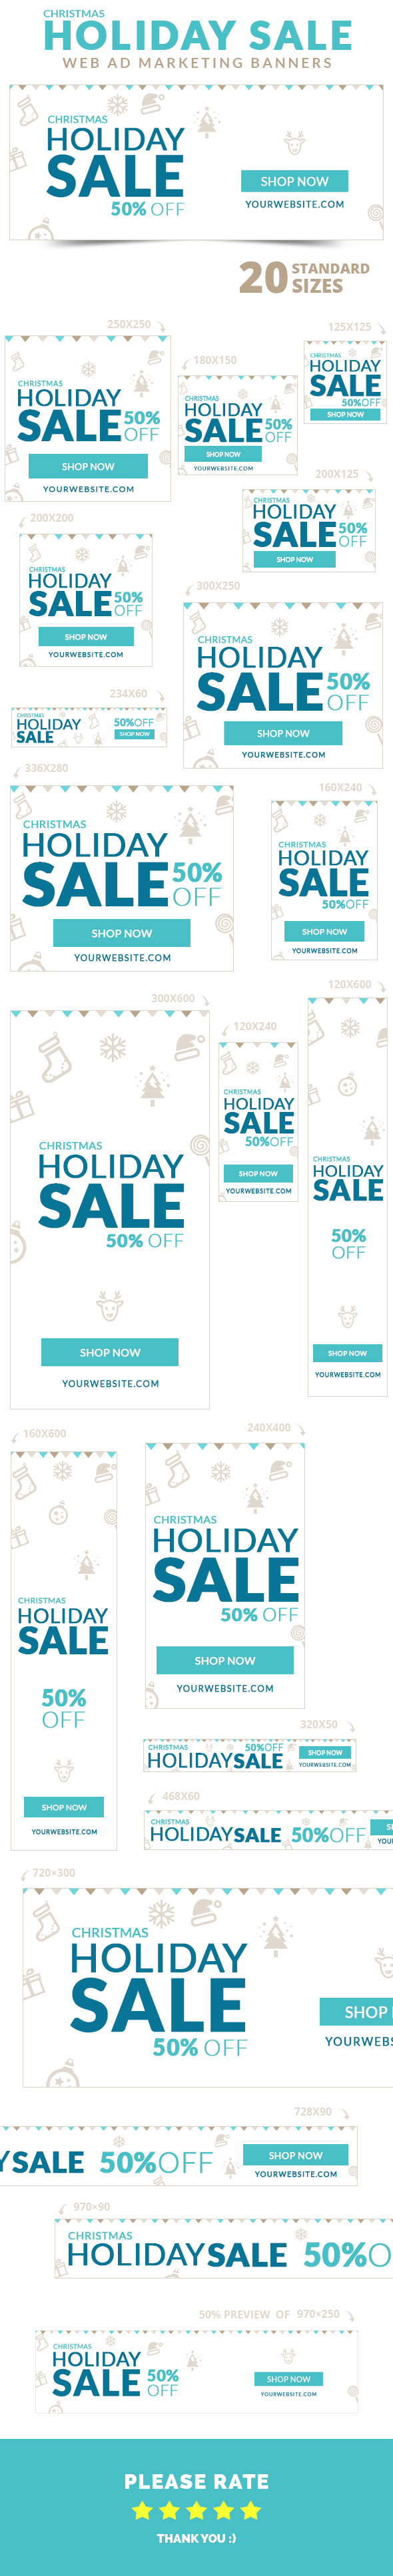 ad ad banners ads advertisement Christmas banners Christmas Sale cool banners creative Event Holiday offers holiday sale Marketing Banners December